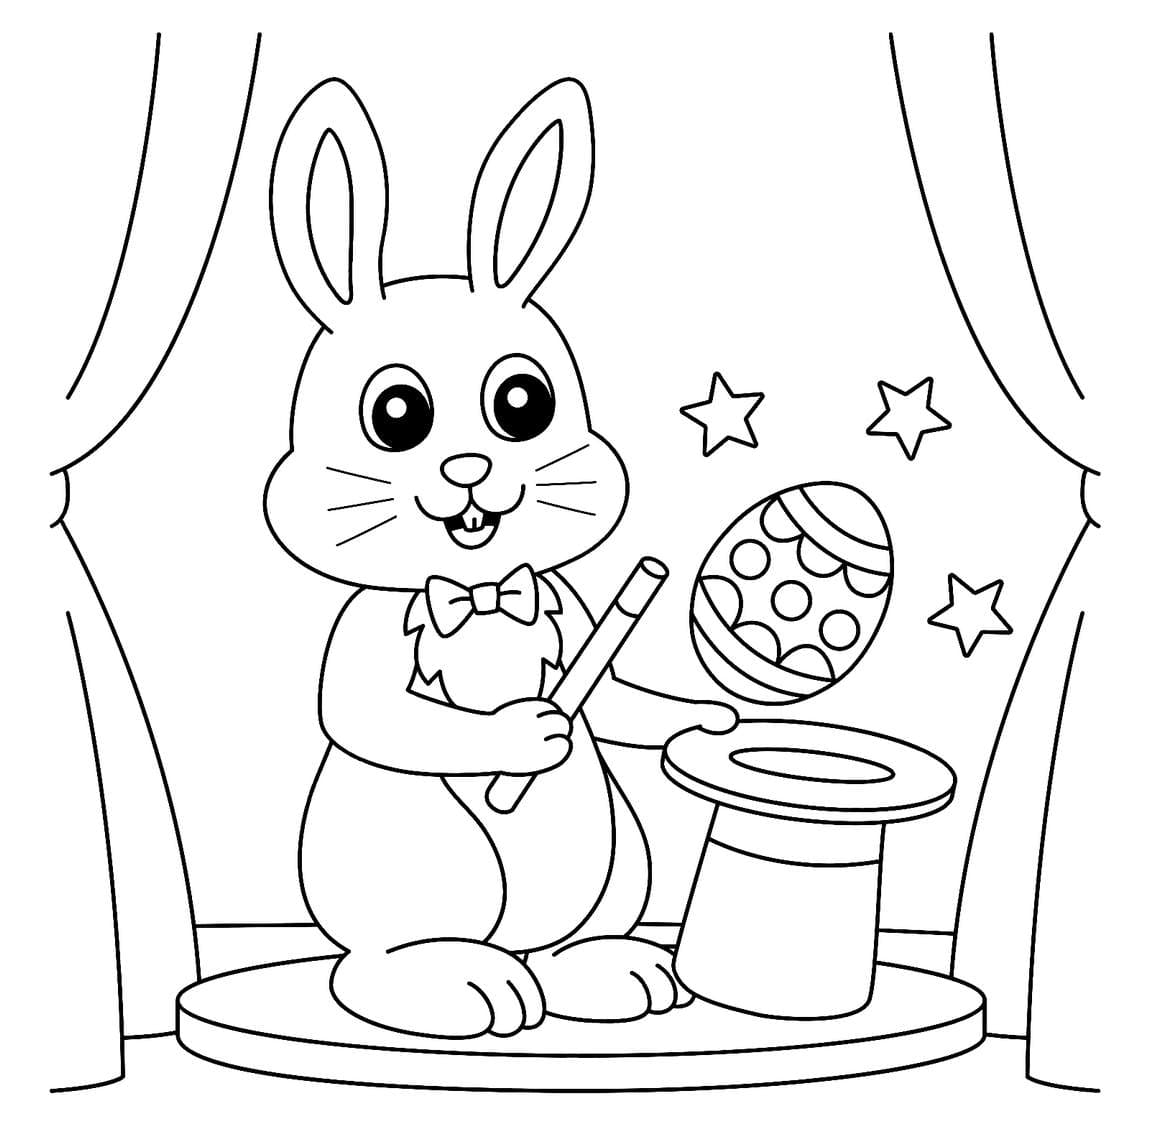 Easter Bunny Coloring Pages   Free Coloring Pages